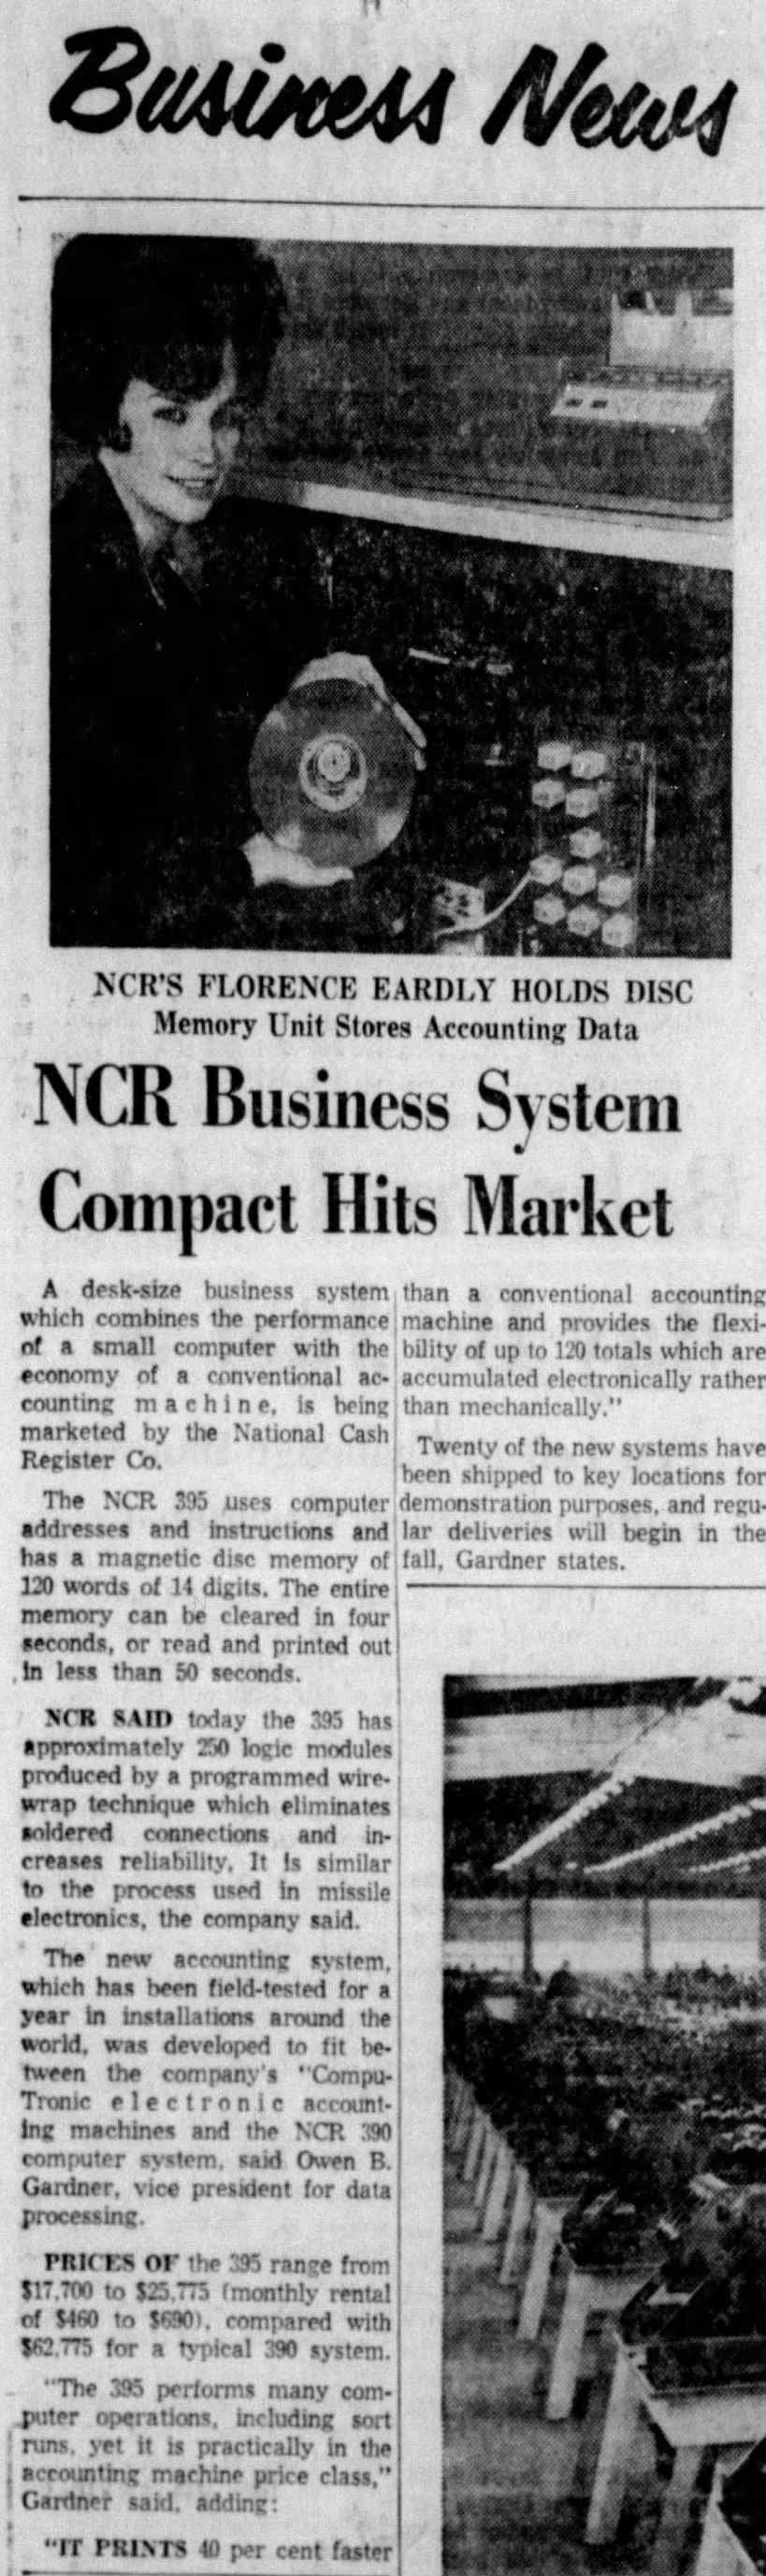 NCR Business System Compact Hits Market